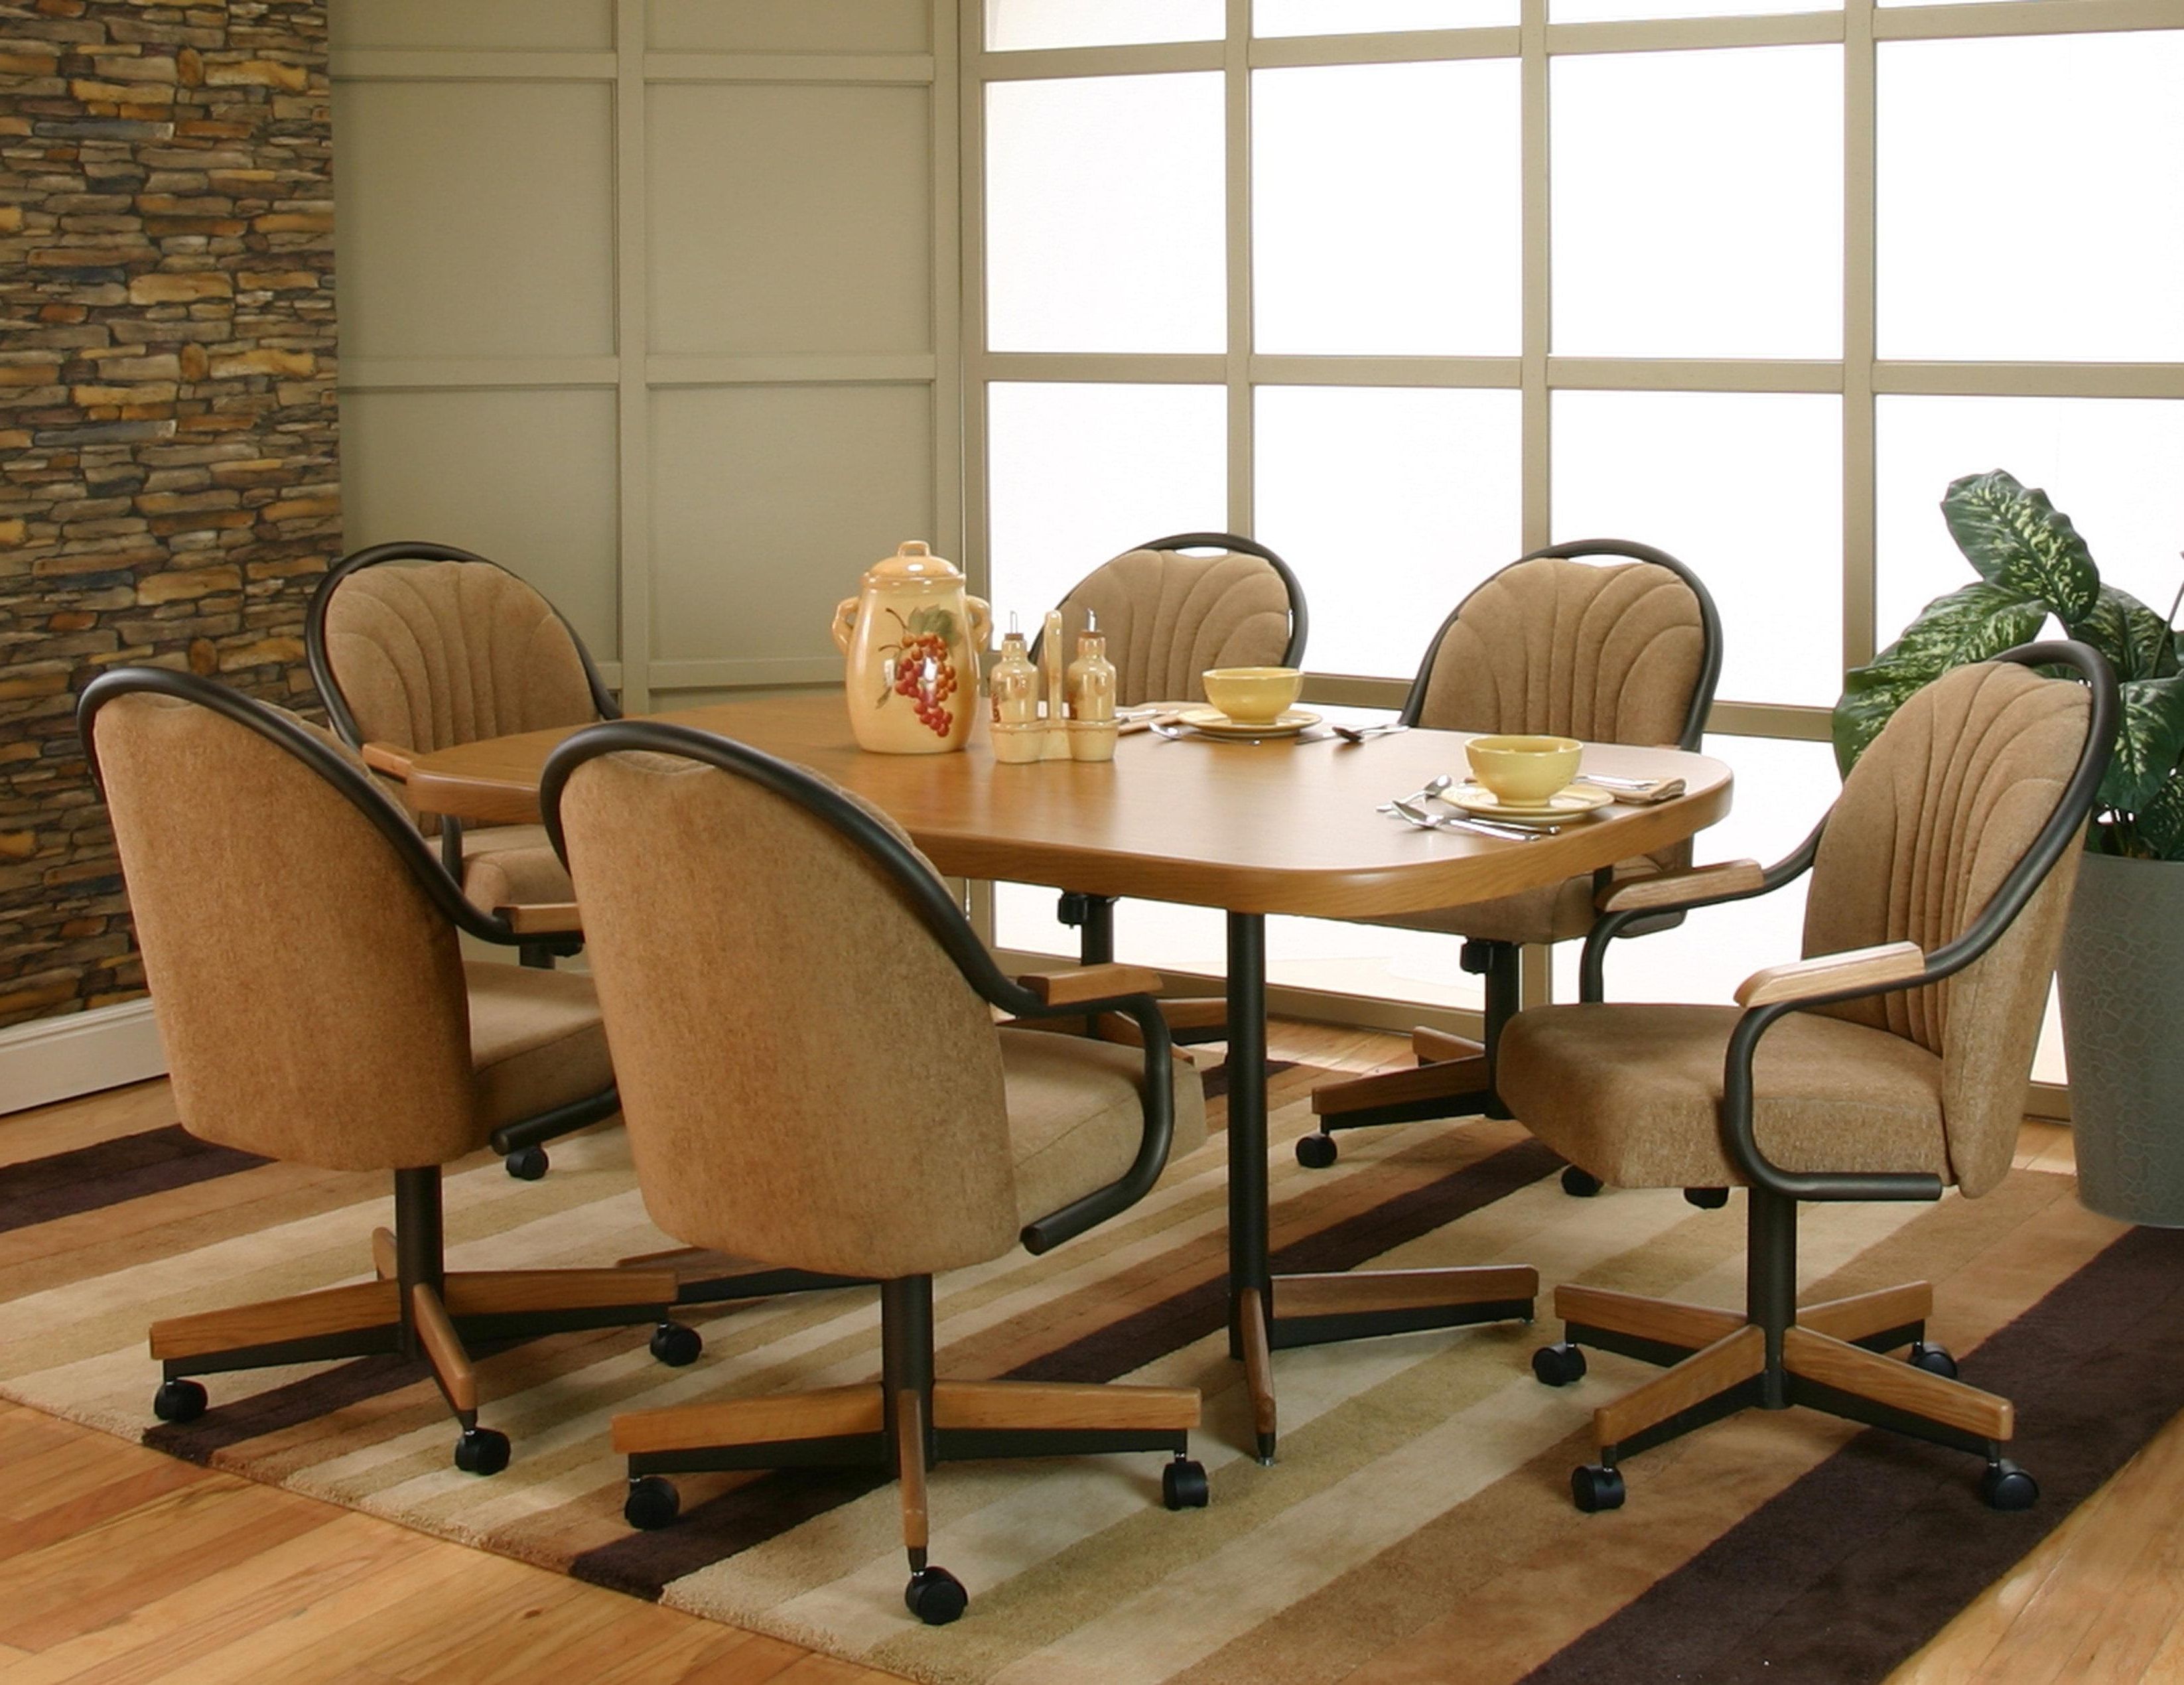 Widely Used Cramco, Inc Shaw Bow End Sunset Oak Laminate Dining Table With 6 Regarding Dining Table Sets With 6 Chairs (View 20 of 25)